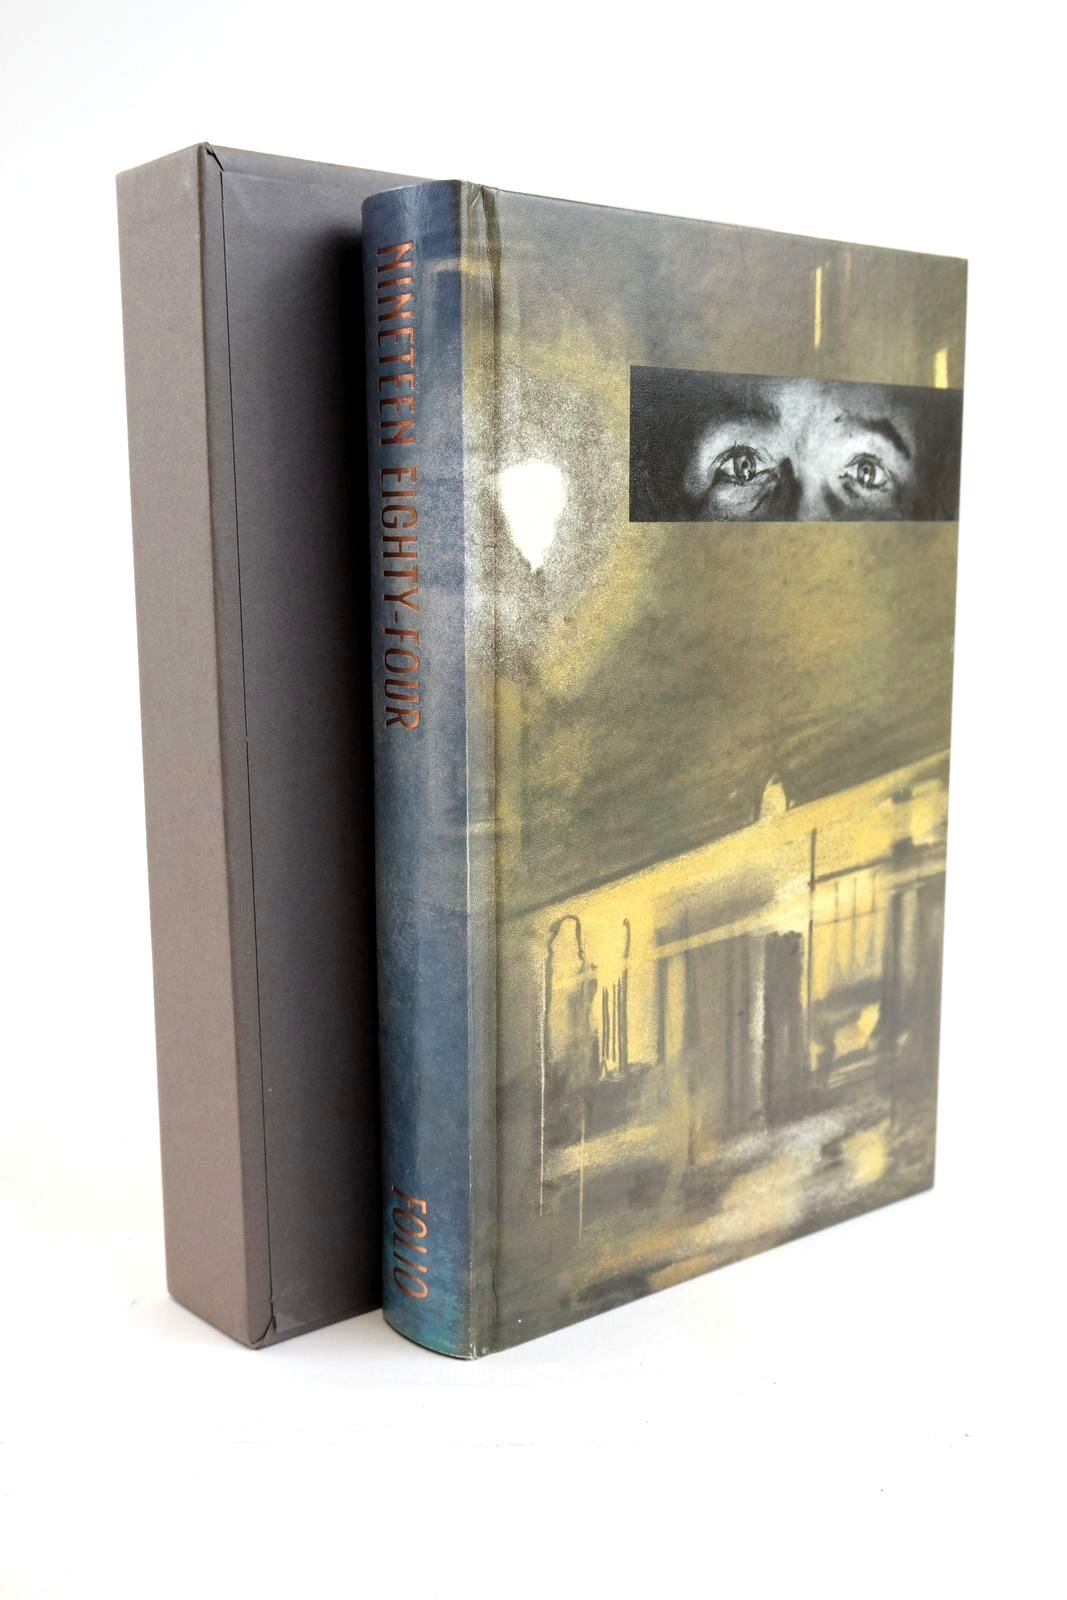 Photo of NINETEEN EIGHTY-FOUR written by Orwell, George illustrated by Devine, Steven published by Folio Society (STOCK CODE: 1321545)  for sale by Stella & Rose's Books